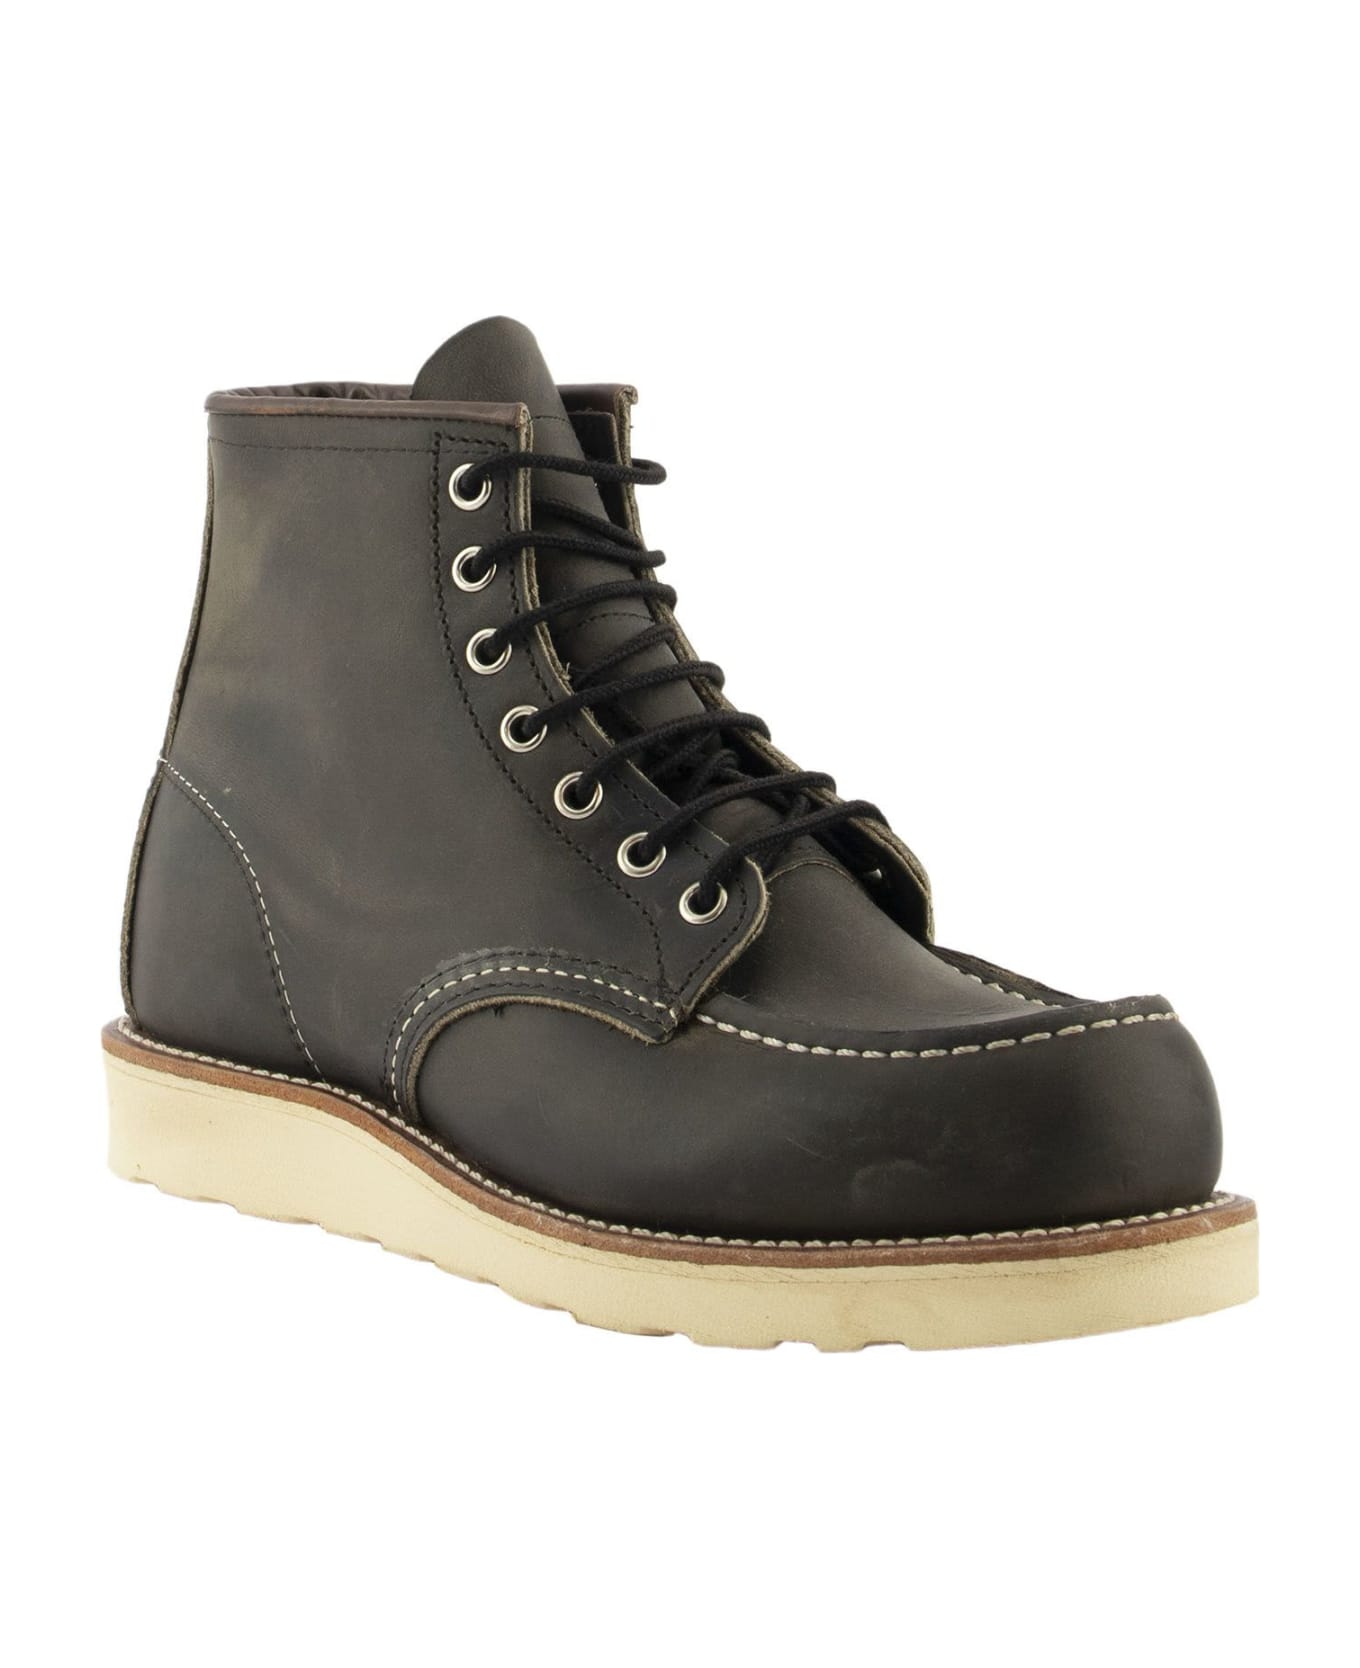 Red Wing Boot Charcoal - Charcoal ブーツ